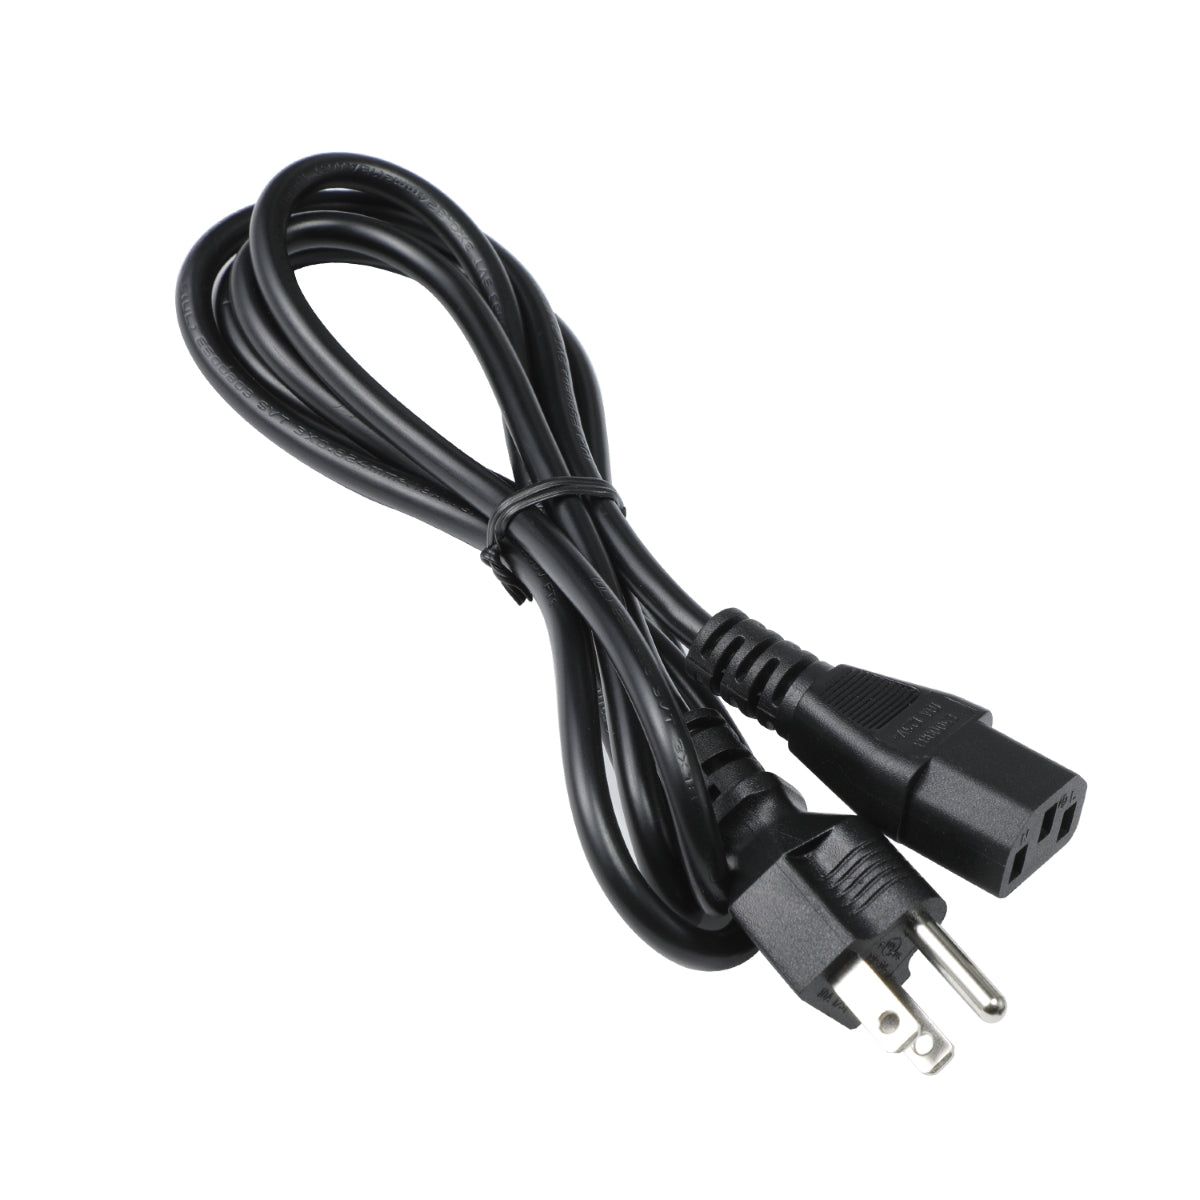 Power Cord for ASUS VG278QE Monitor